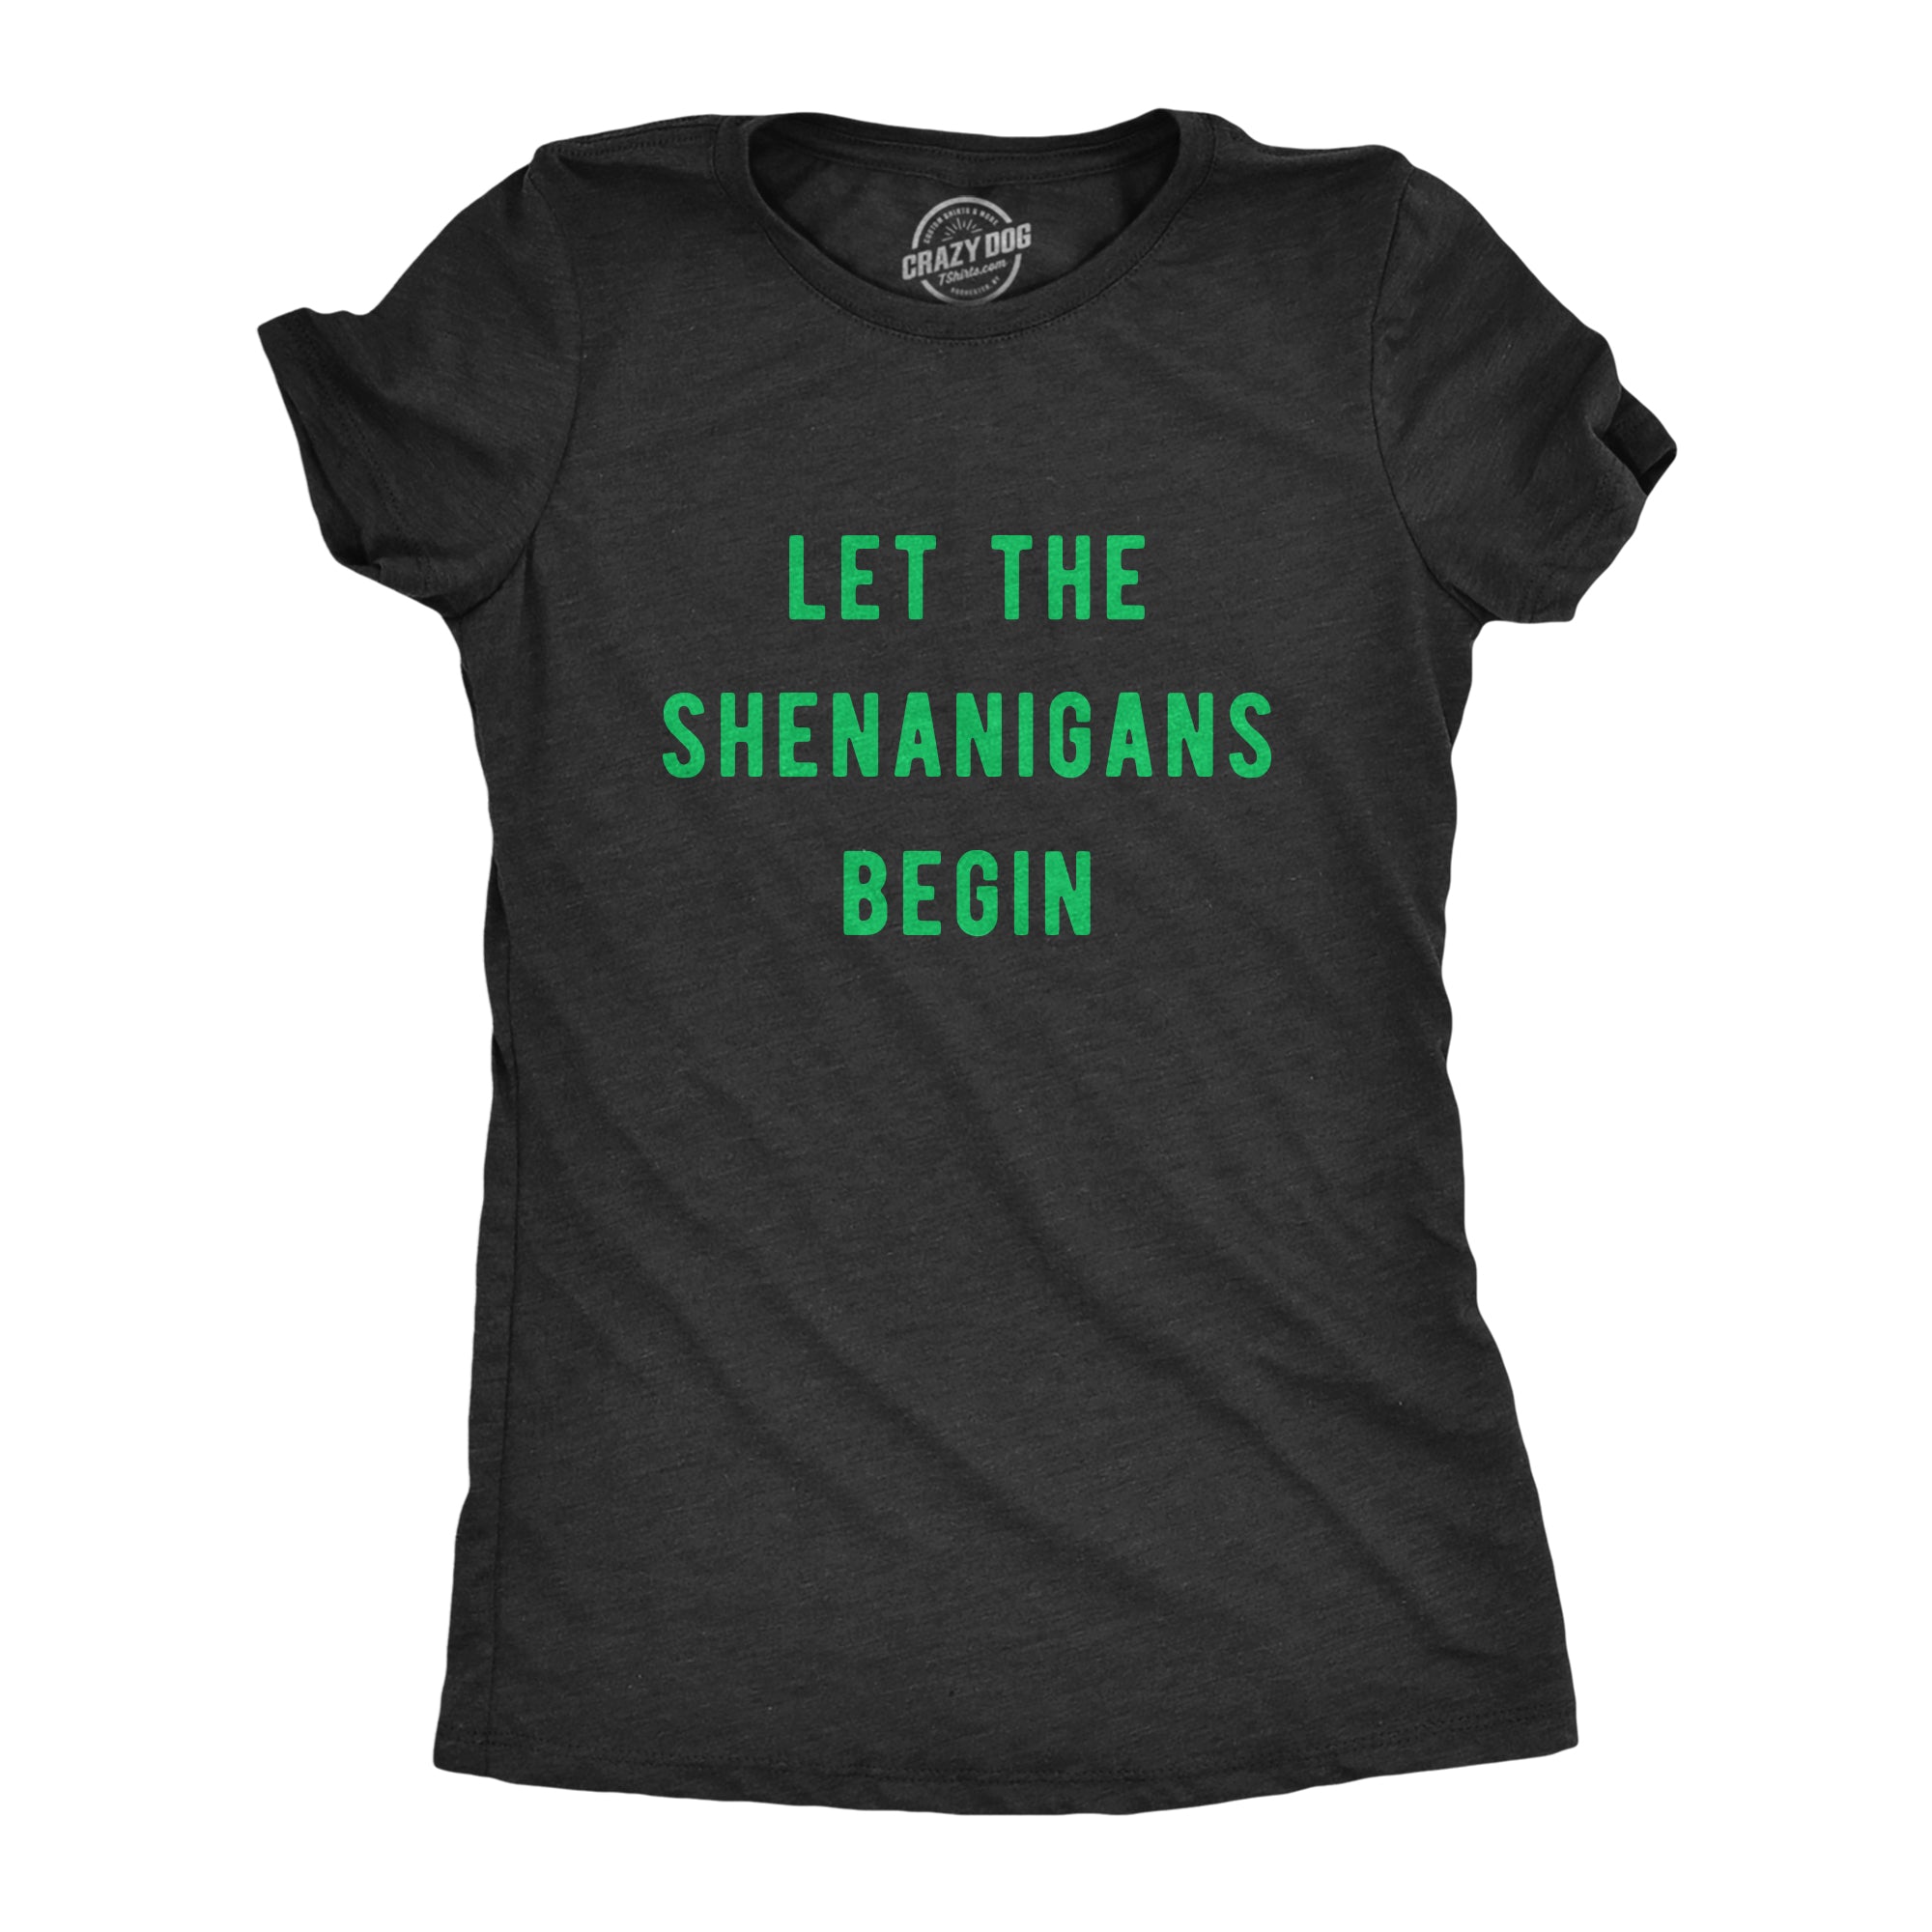 Funny Heather Black Let The Shenanigans Begin Womens T Shirt Nerdy Saint Patrick's Day Beer Tee